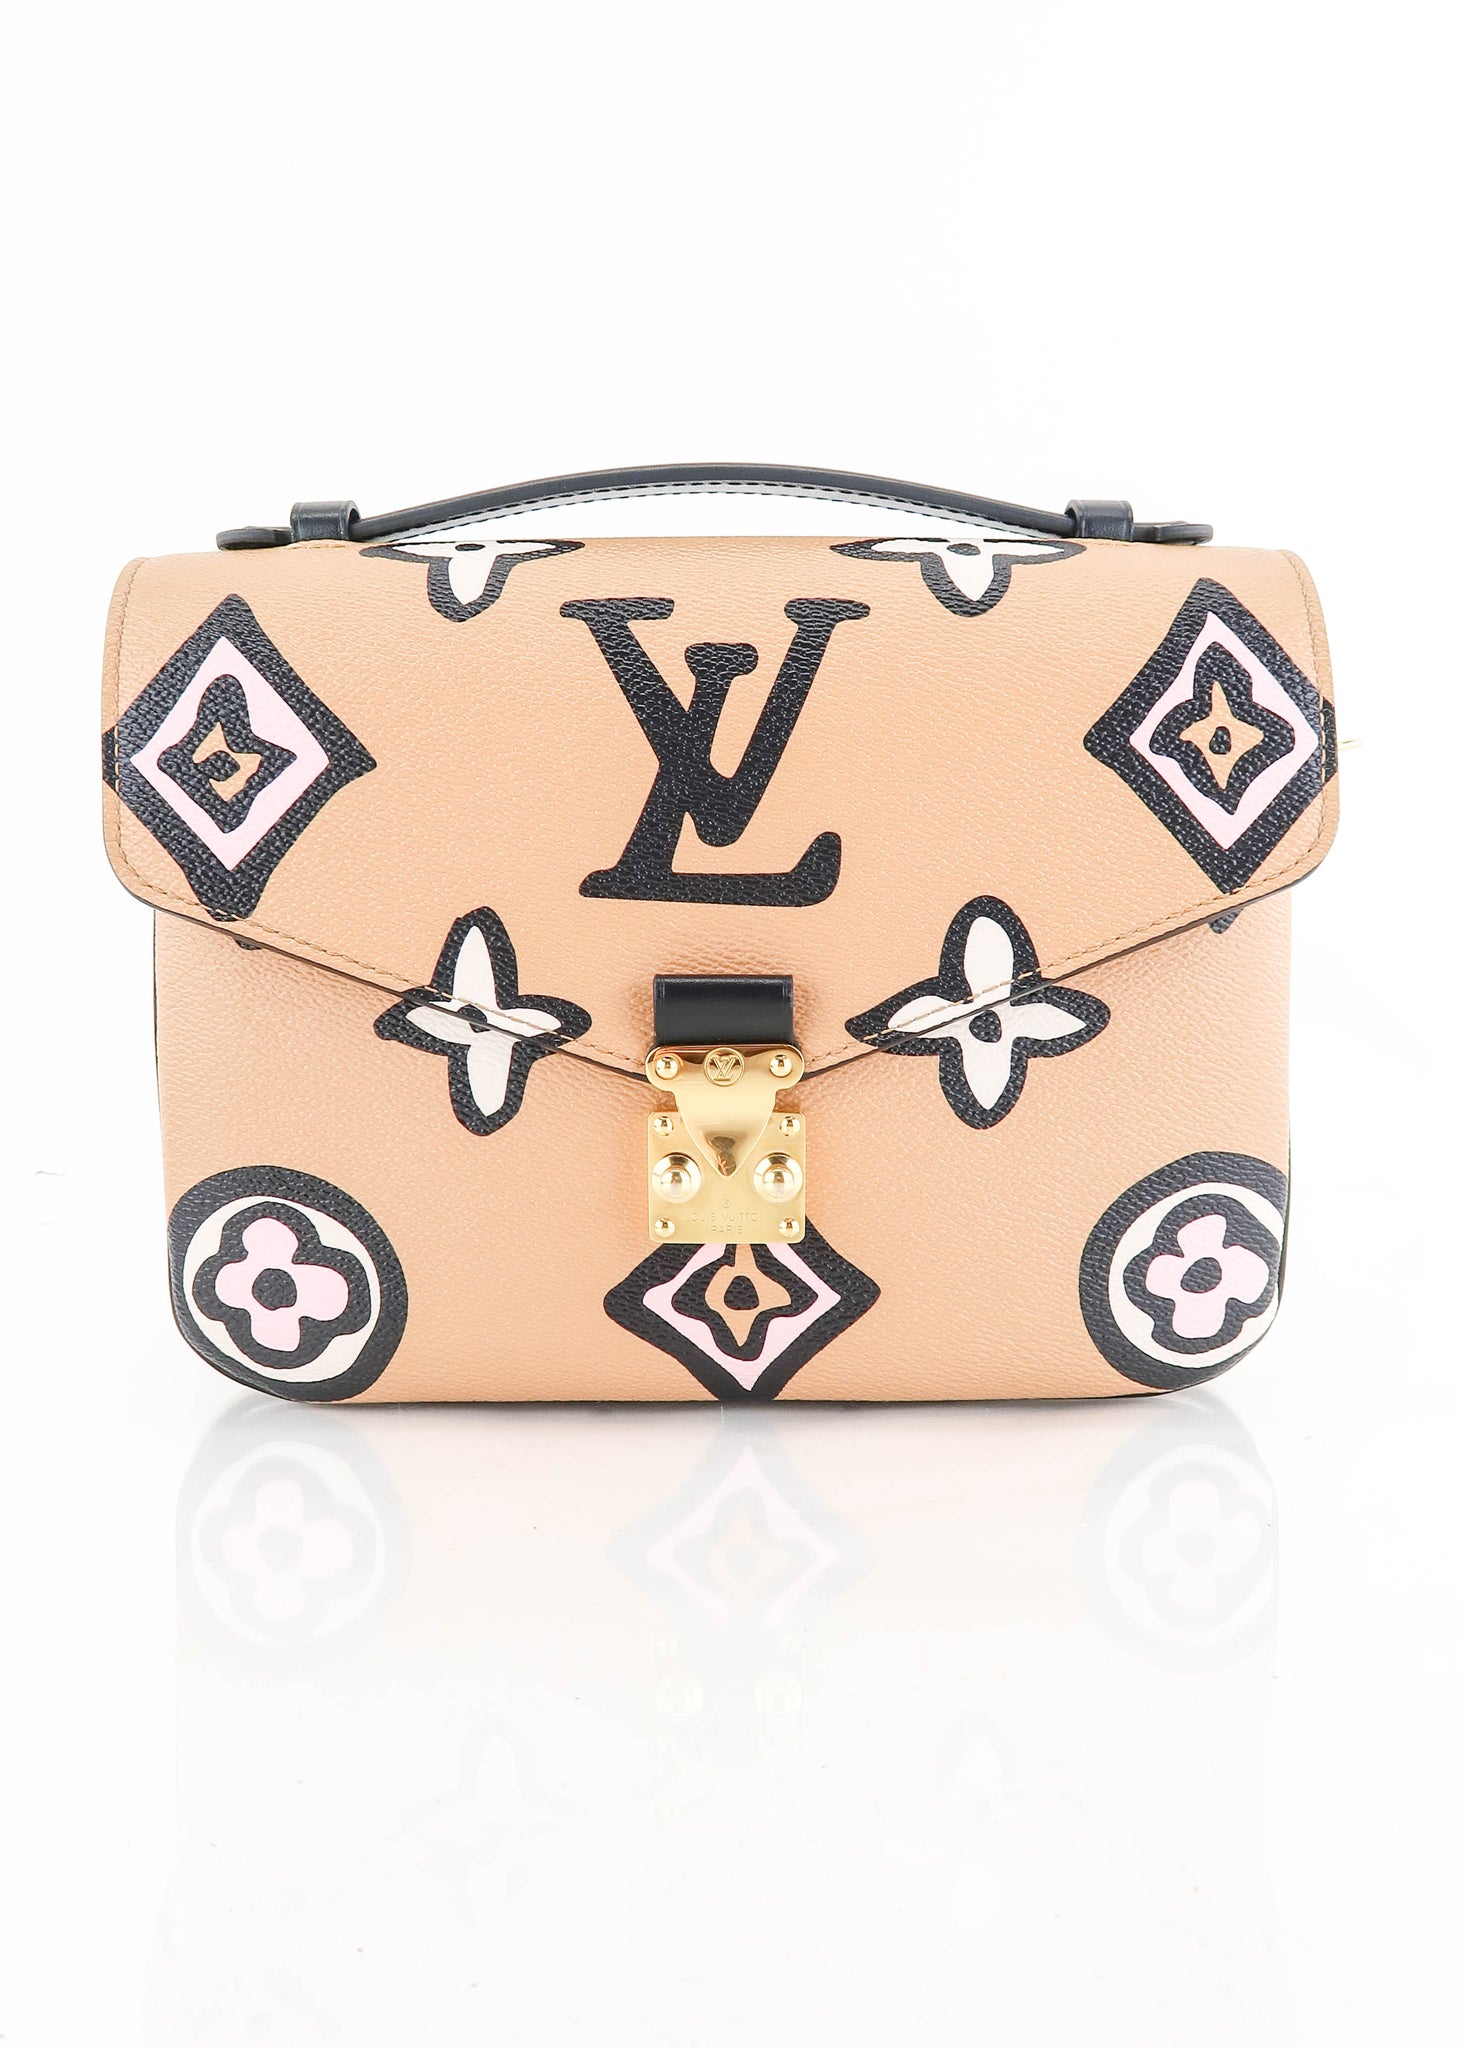 ITS HERE Louis Vuitton Wild at heart, Louis Vuitton Wild at heart, LV wild  at heart